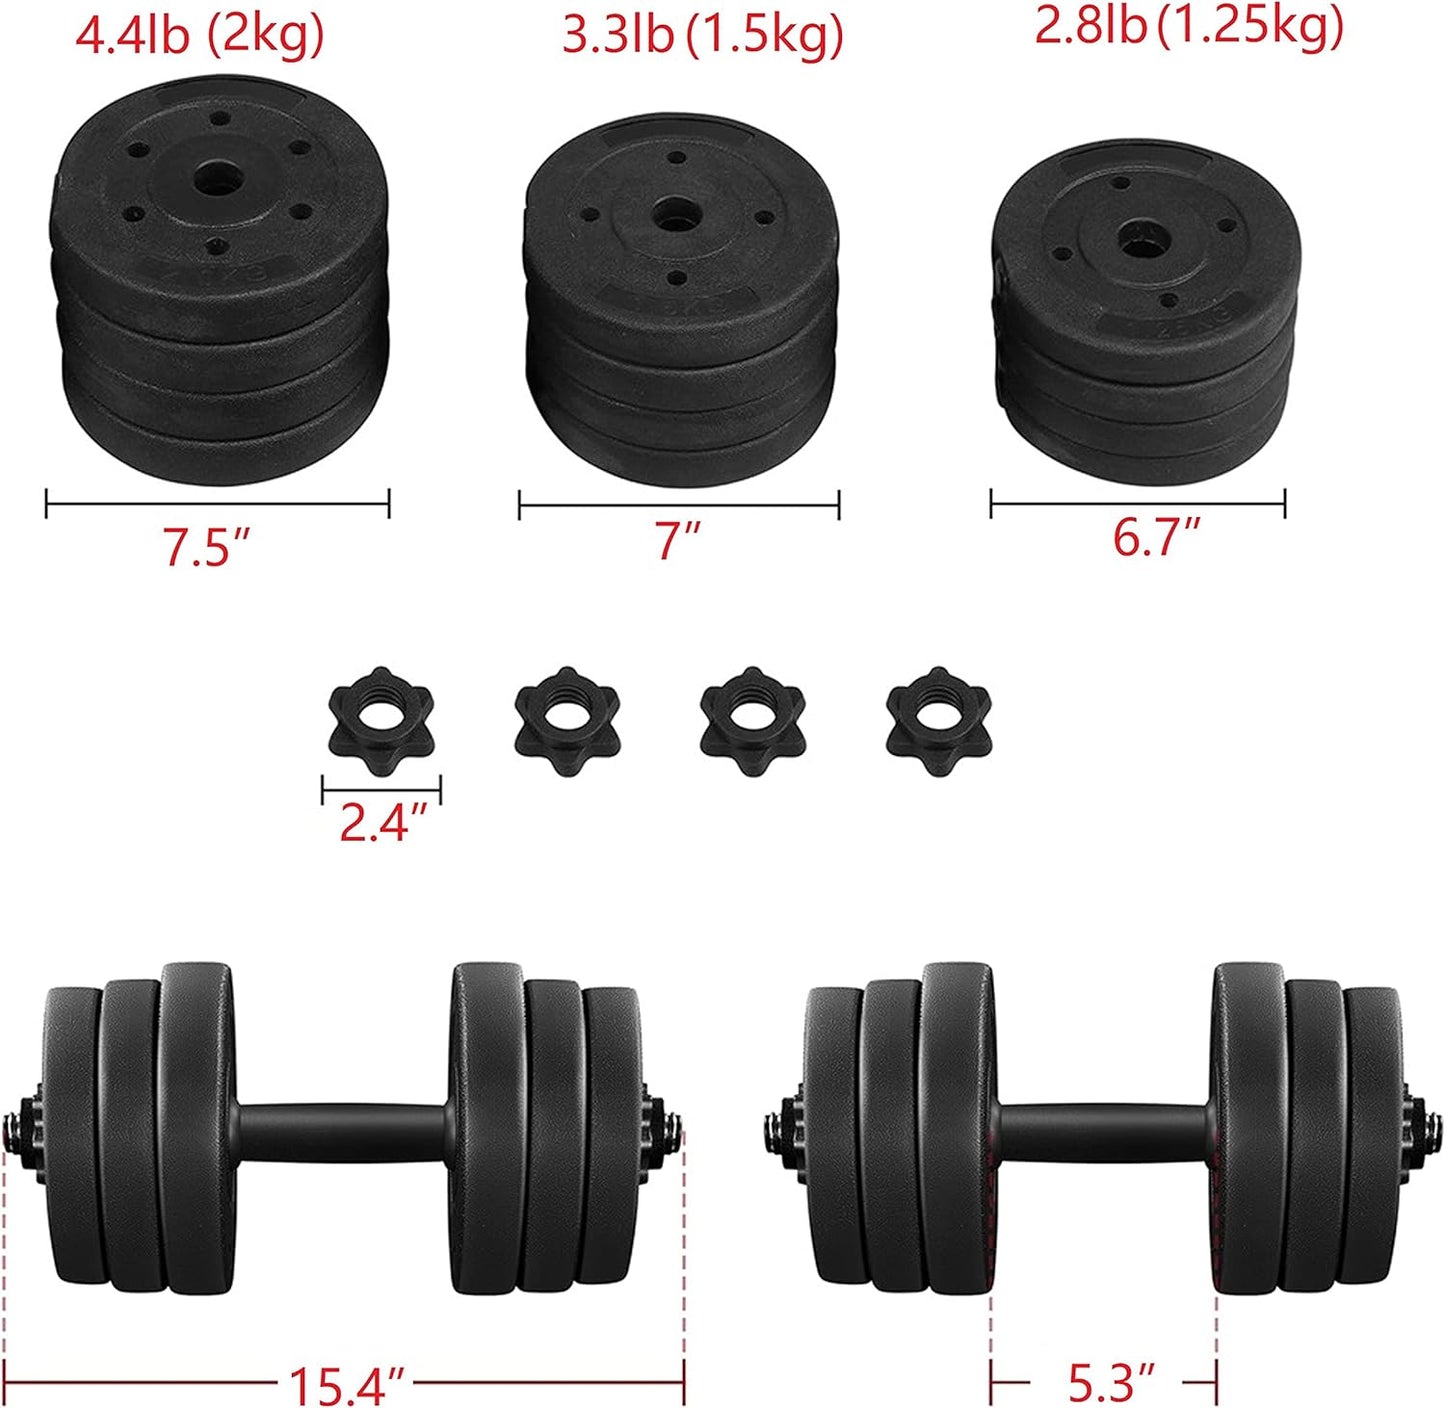 Yaheetech Adjustable Dumbbells Weight Set Dumbbell Weights Exercise & Fitness Equipment w\/ 4 Spinlock Collars & 2 Connector Options for Women & Men Gym Home Strength Bodybuilding Training 44LB\/66LB